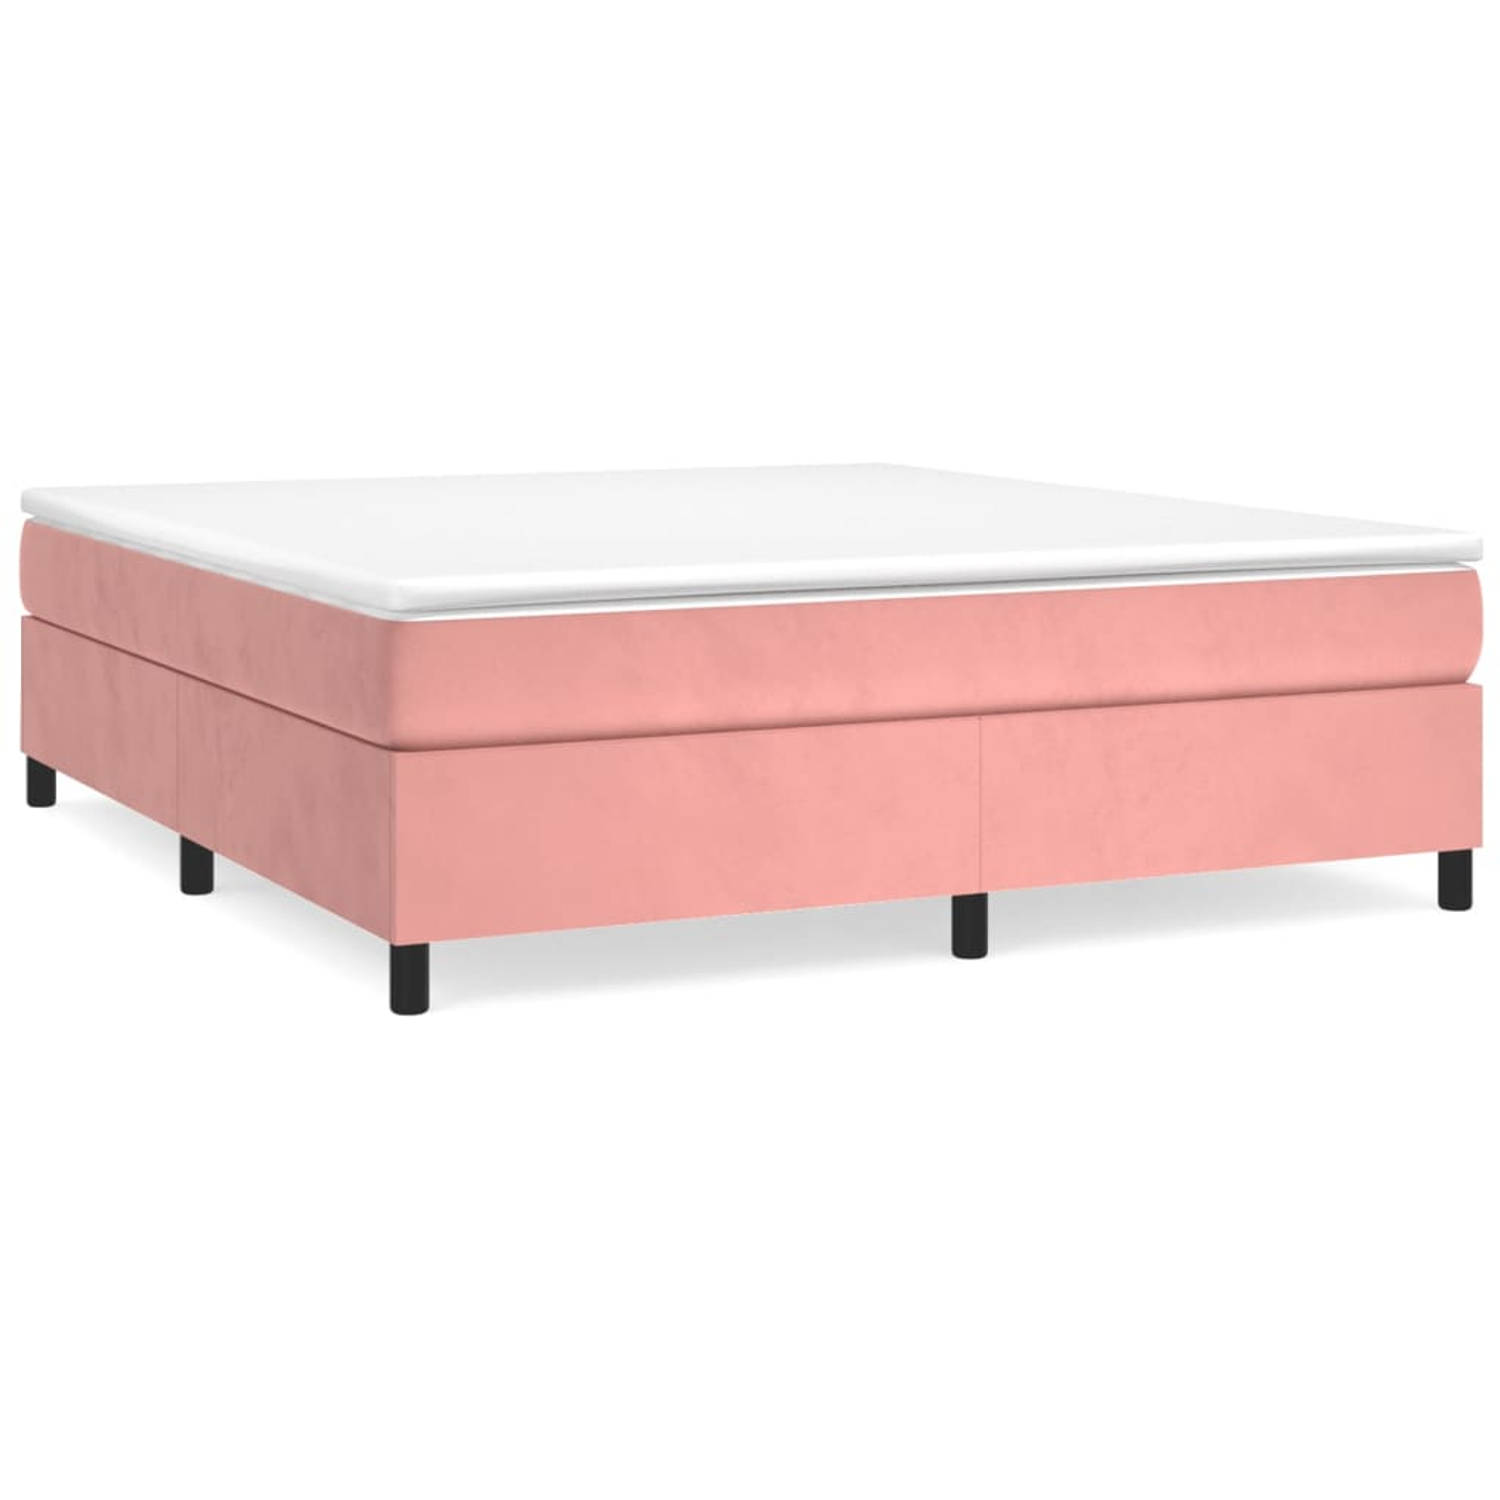 The Living Store Boxspringframe fluweel roze 180x200 cm - Bed